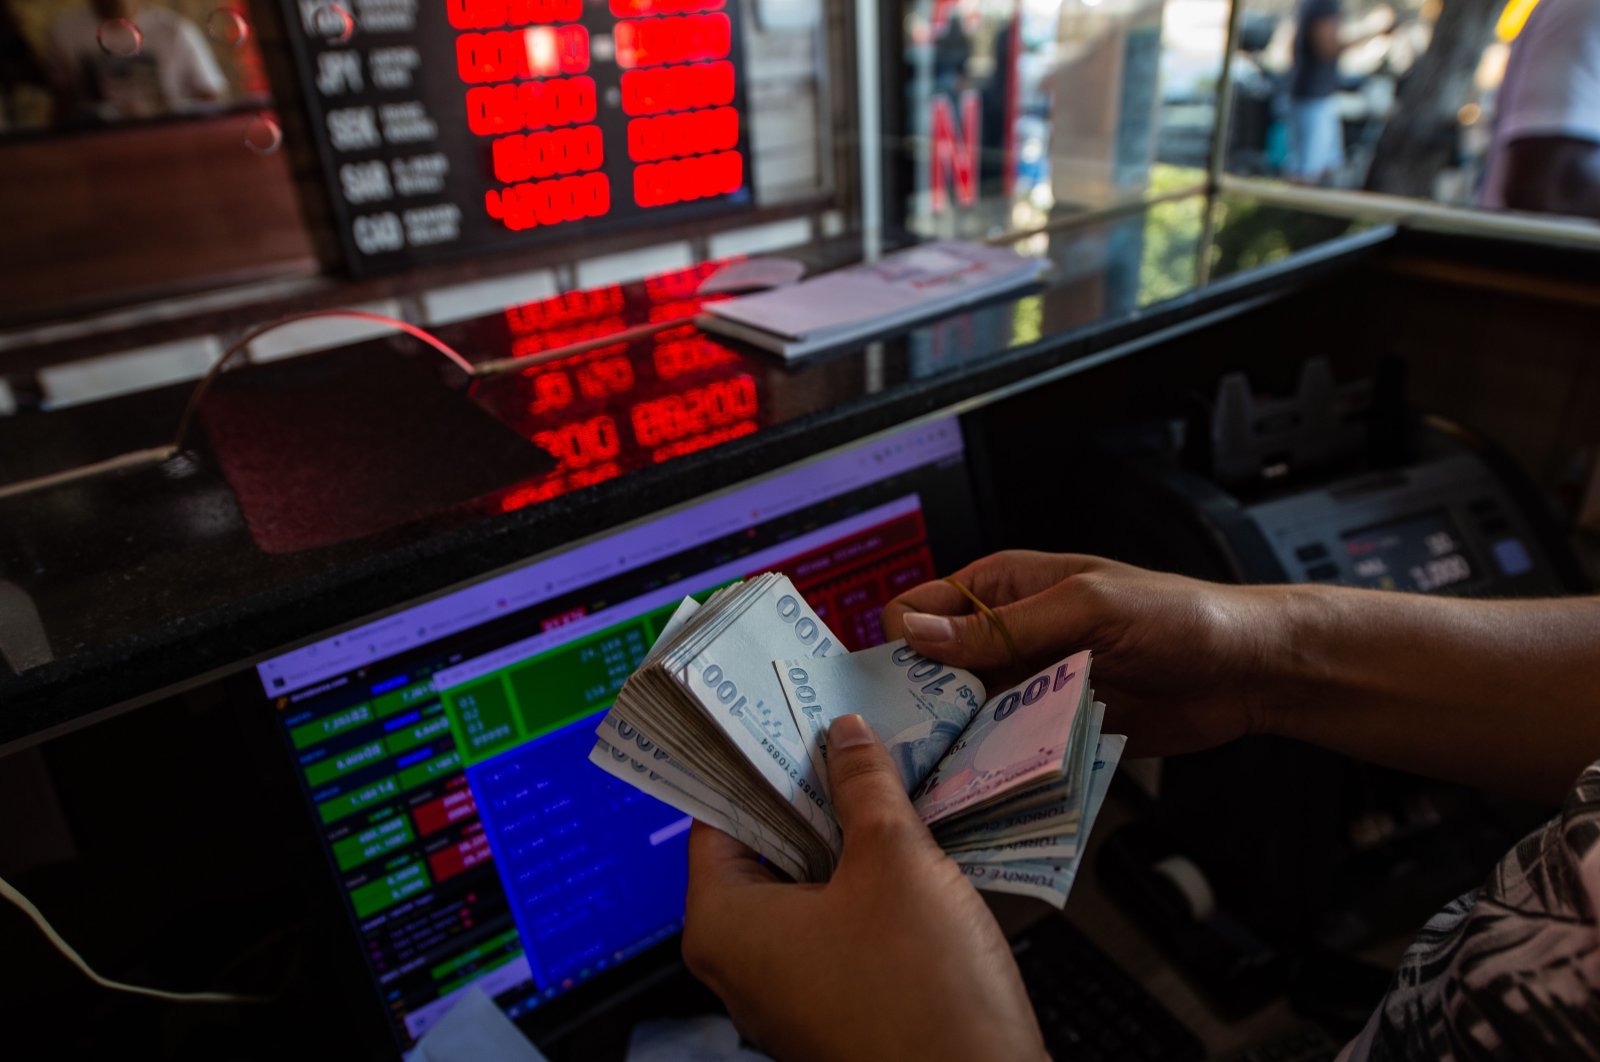 A currency exchange office worker counts Turkish lira banknotes in front of the electronic panel displaying currency exchange rates at an exchange office in Istanbul, Turkey, Aug. 6, 2020. (AFP Photo)